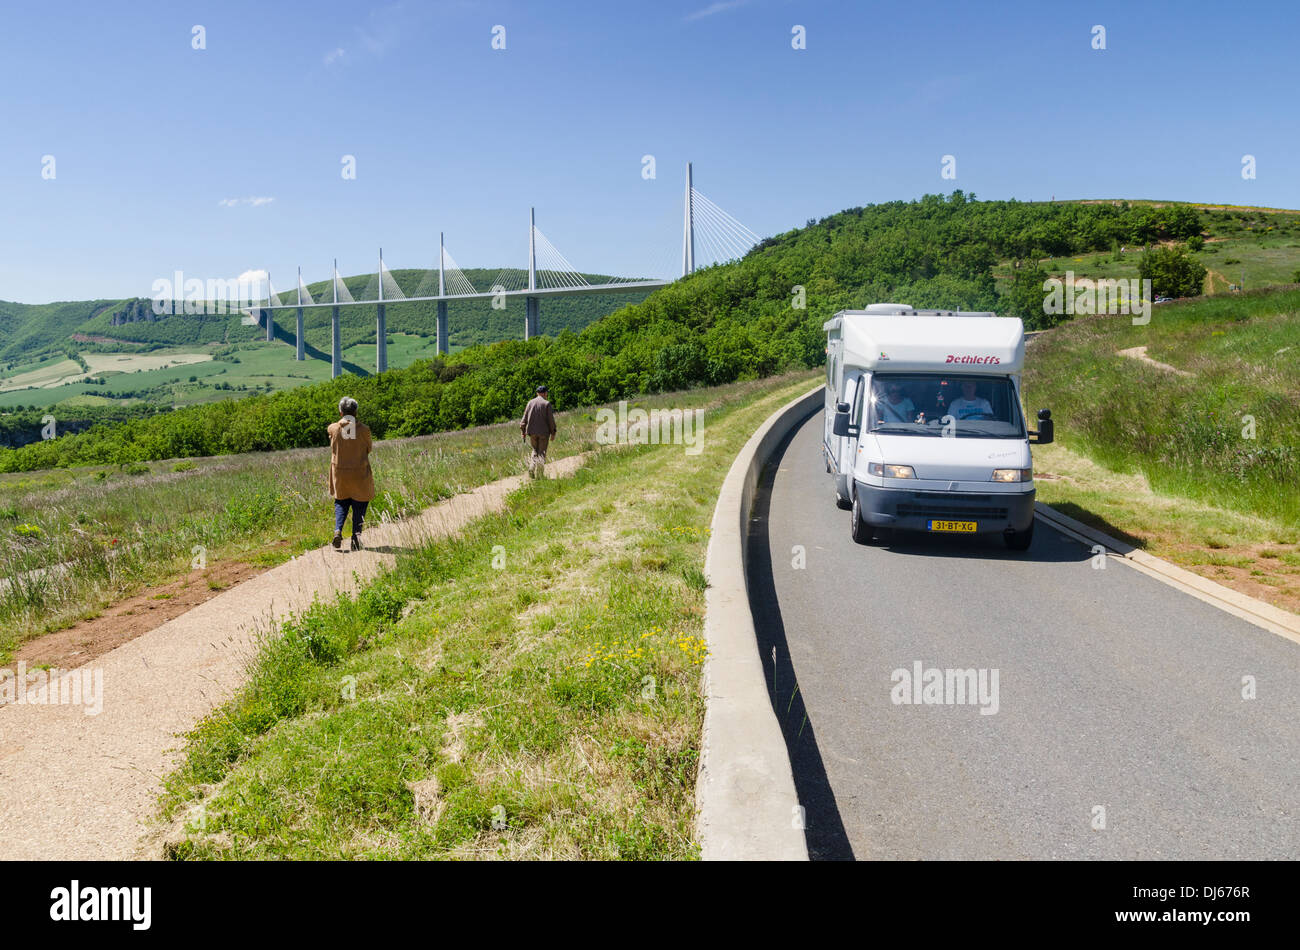 Tourists at the Millau Viaduct, a cable-stayed bridge near the town of Millau in southern France Stock Photo